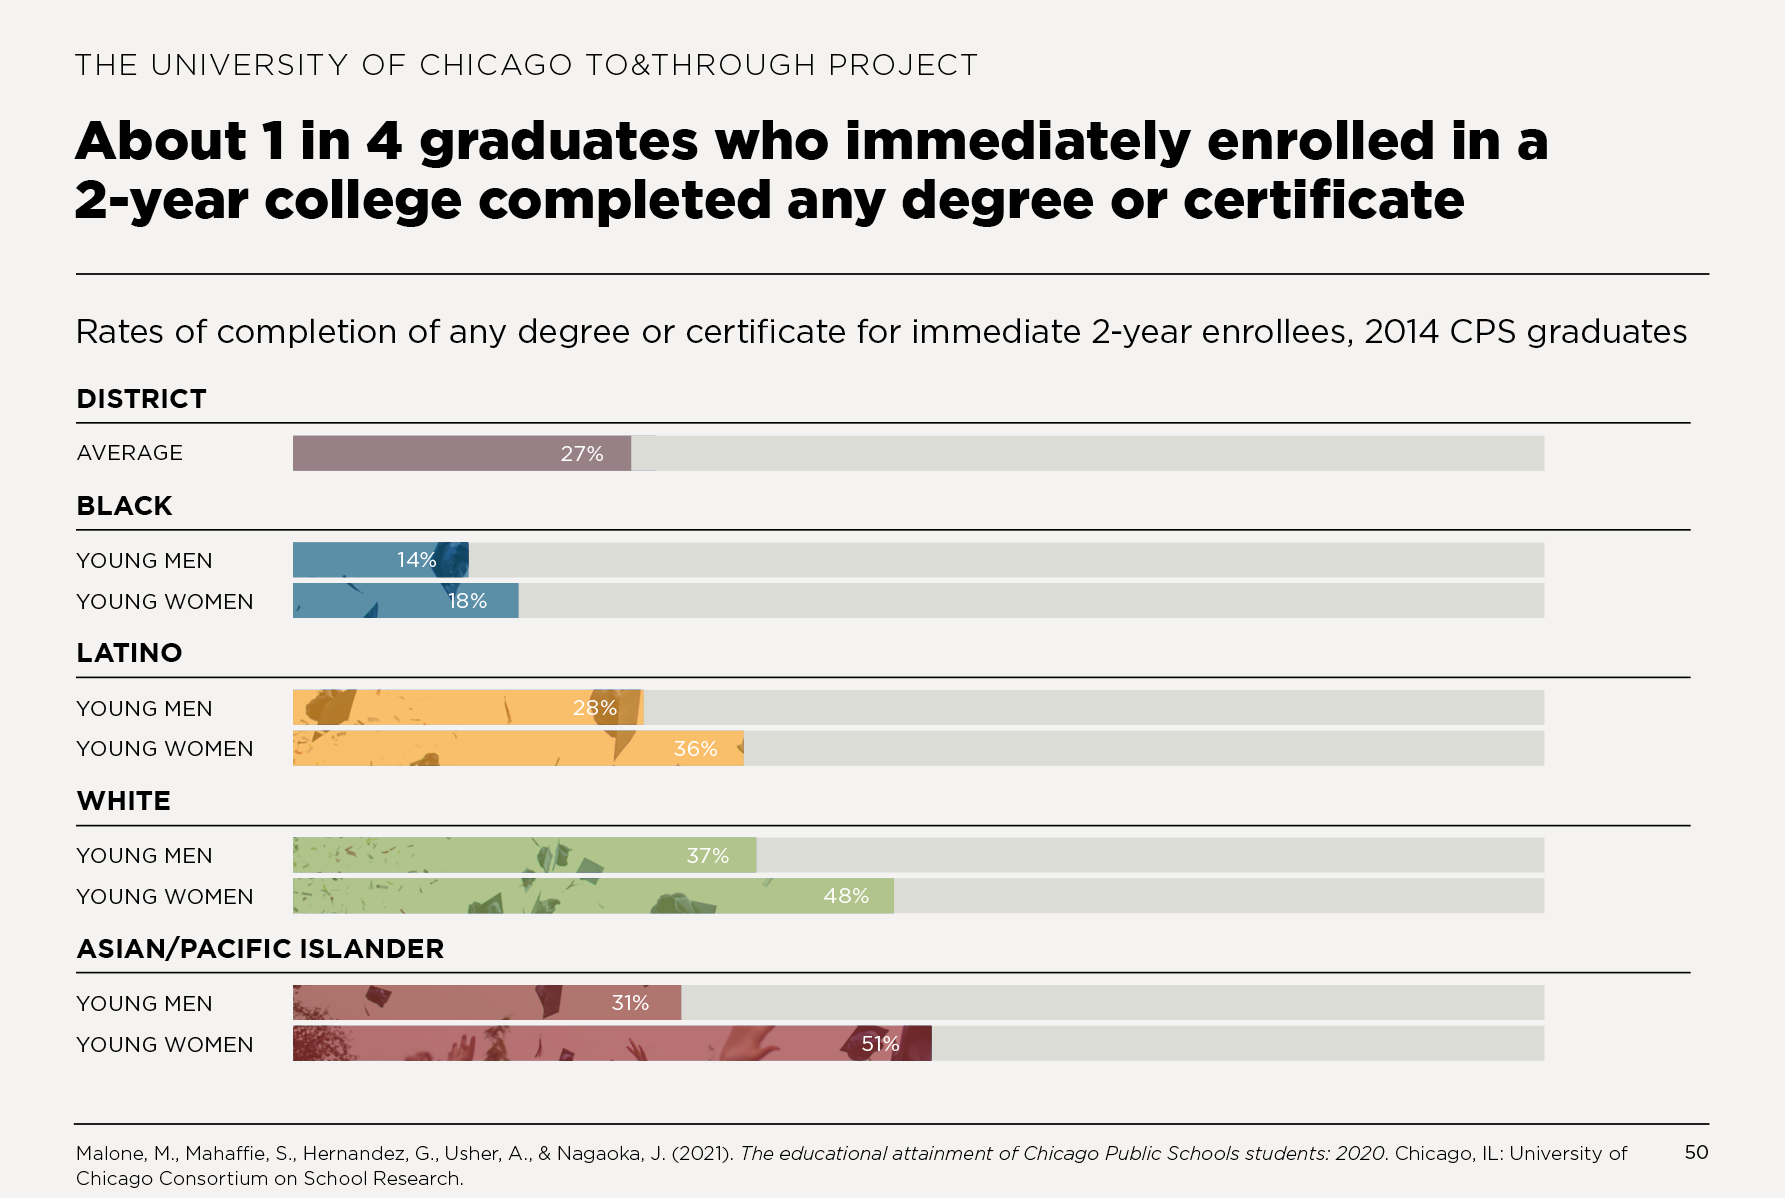 About 1 in 4 graduates who immediately enrolled in a 2-year college completed any degree or certificate